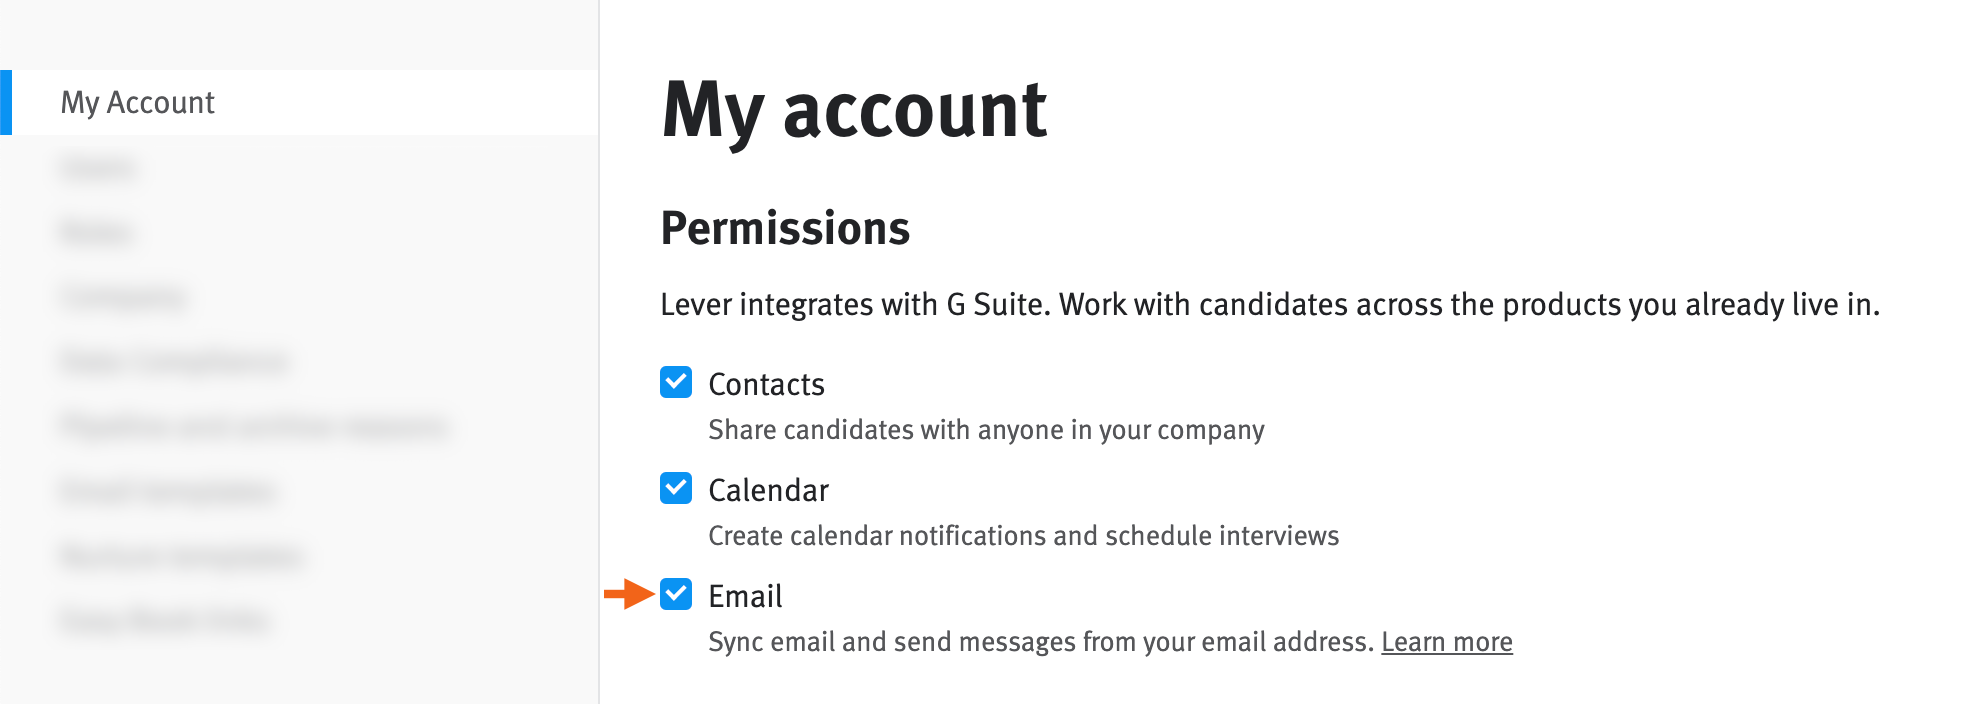 Permissions checkboxes on account settings page with arrow pointing to email permission checkbox.